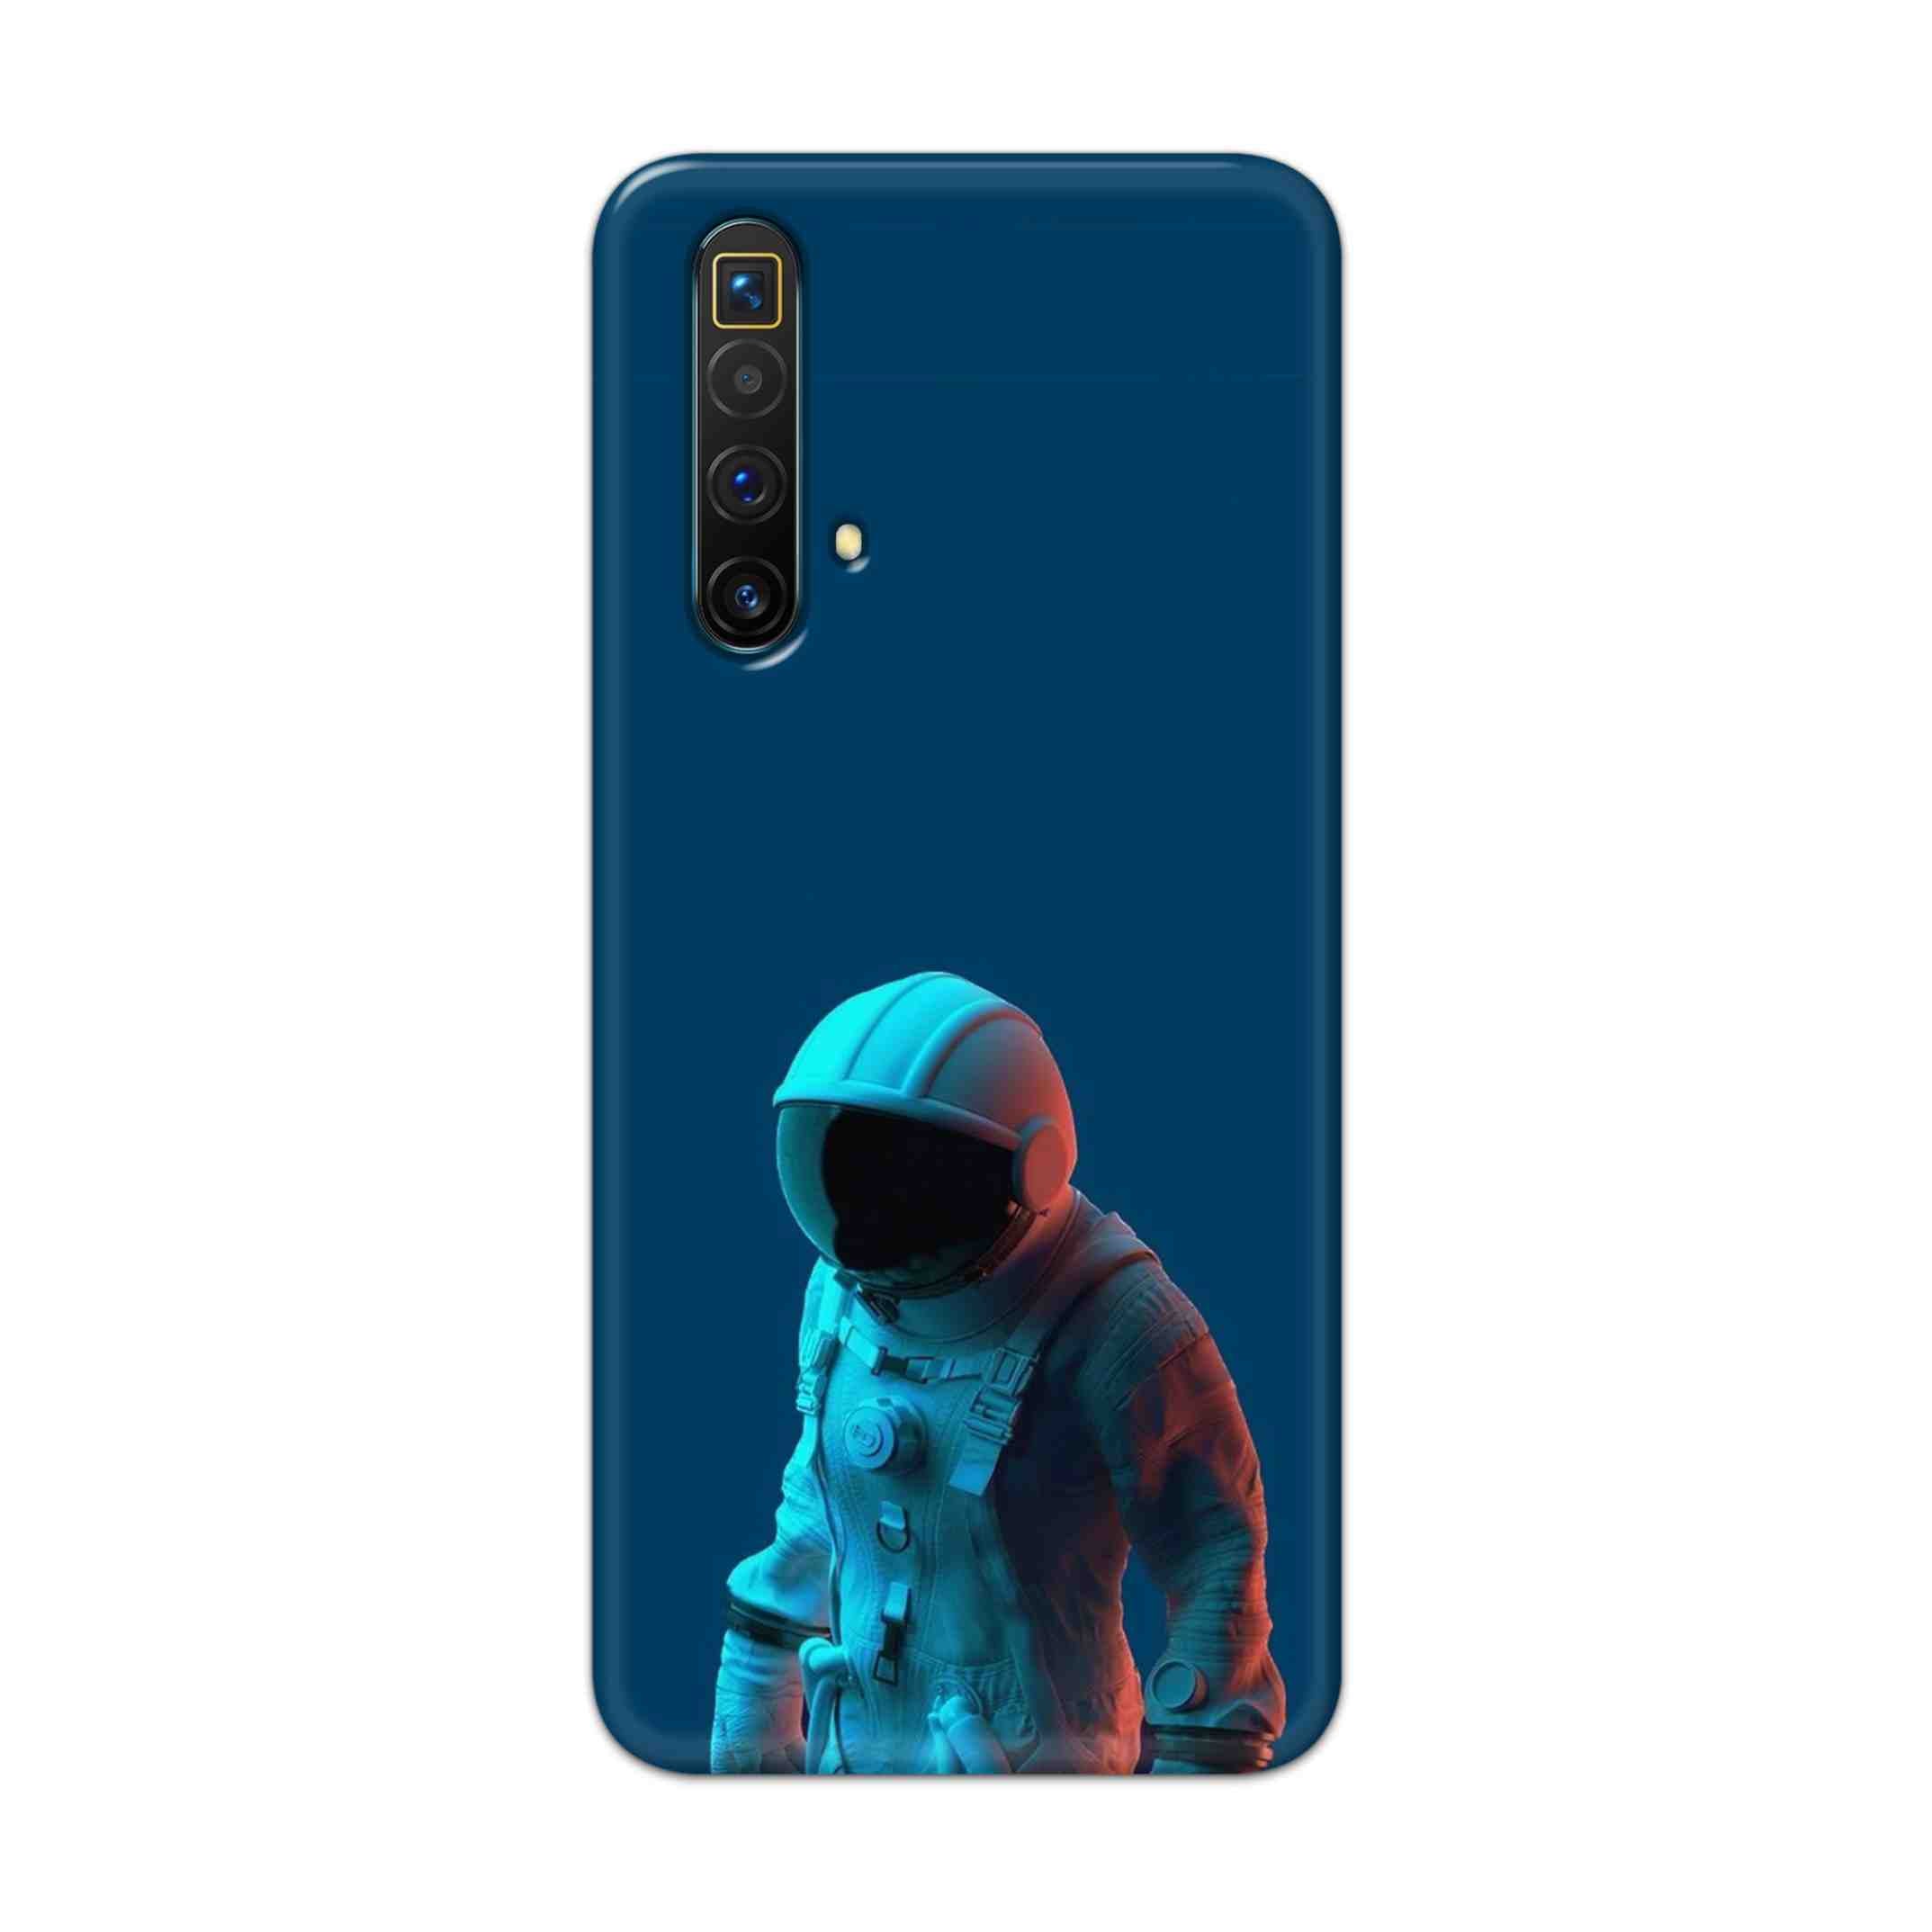 Buy Blue Astronaut Hard Back Mobile Phone Case Cover For Realme X3 Superzoom Online